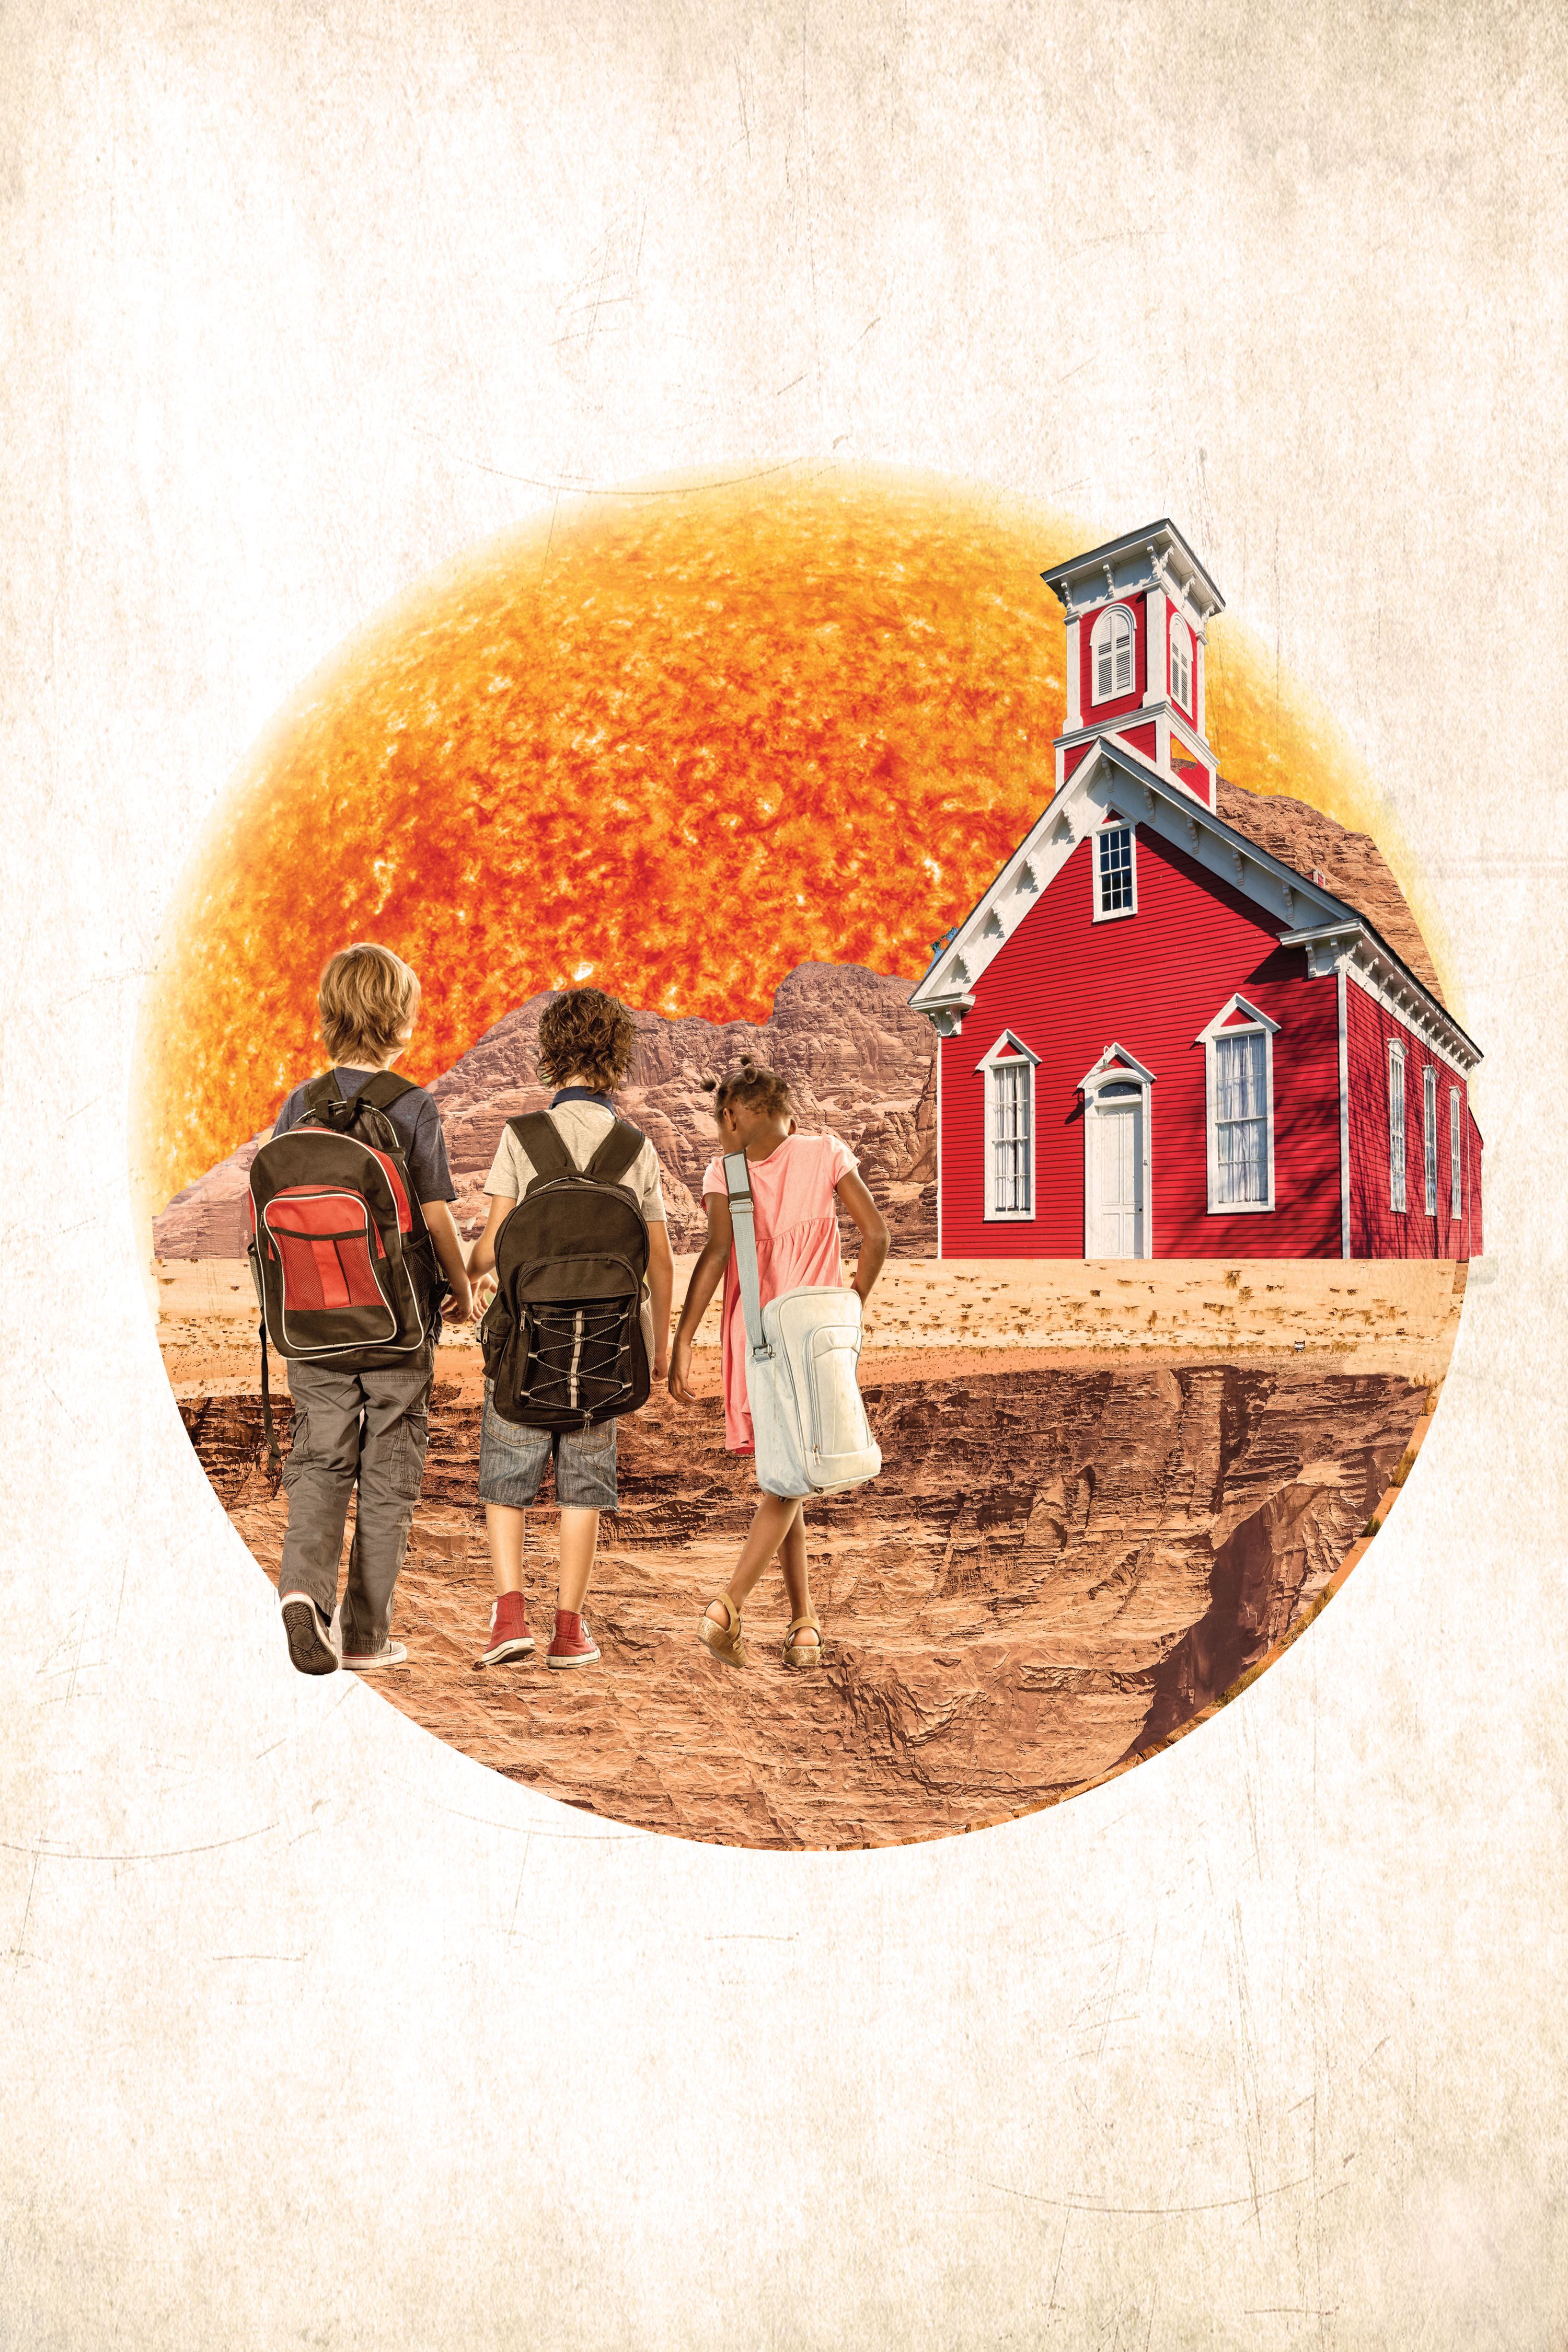 Illustration of three children walking to a red schoolhouse in a desert environment and a large, red sun representing heat in the background. 